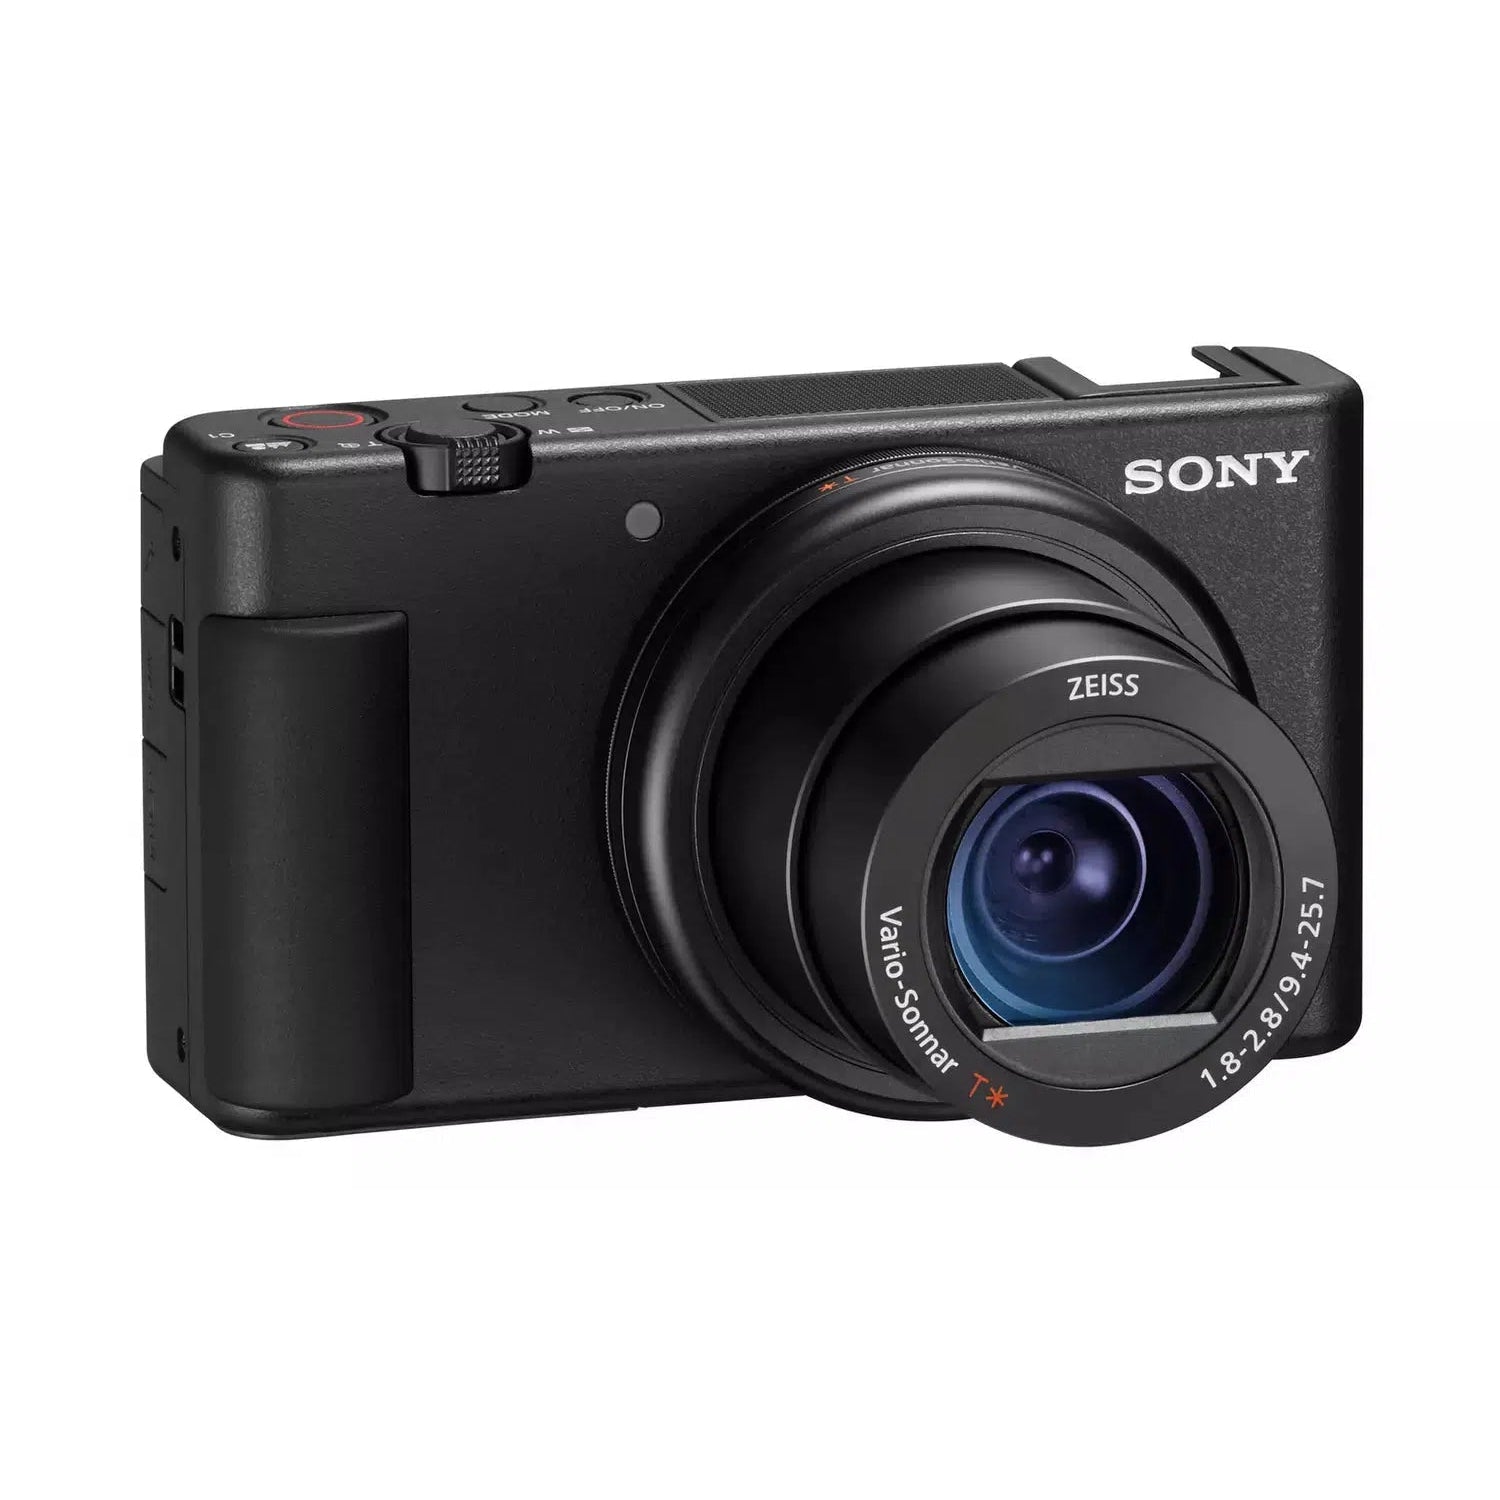 Sony ZV-1 Compact Vlogging Camera with 24-70mm Lens - Black - Pristine - No Charger